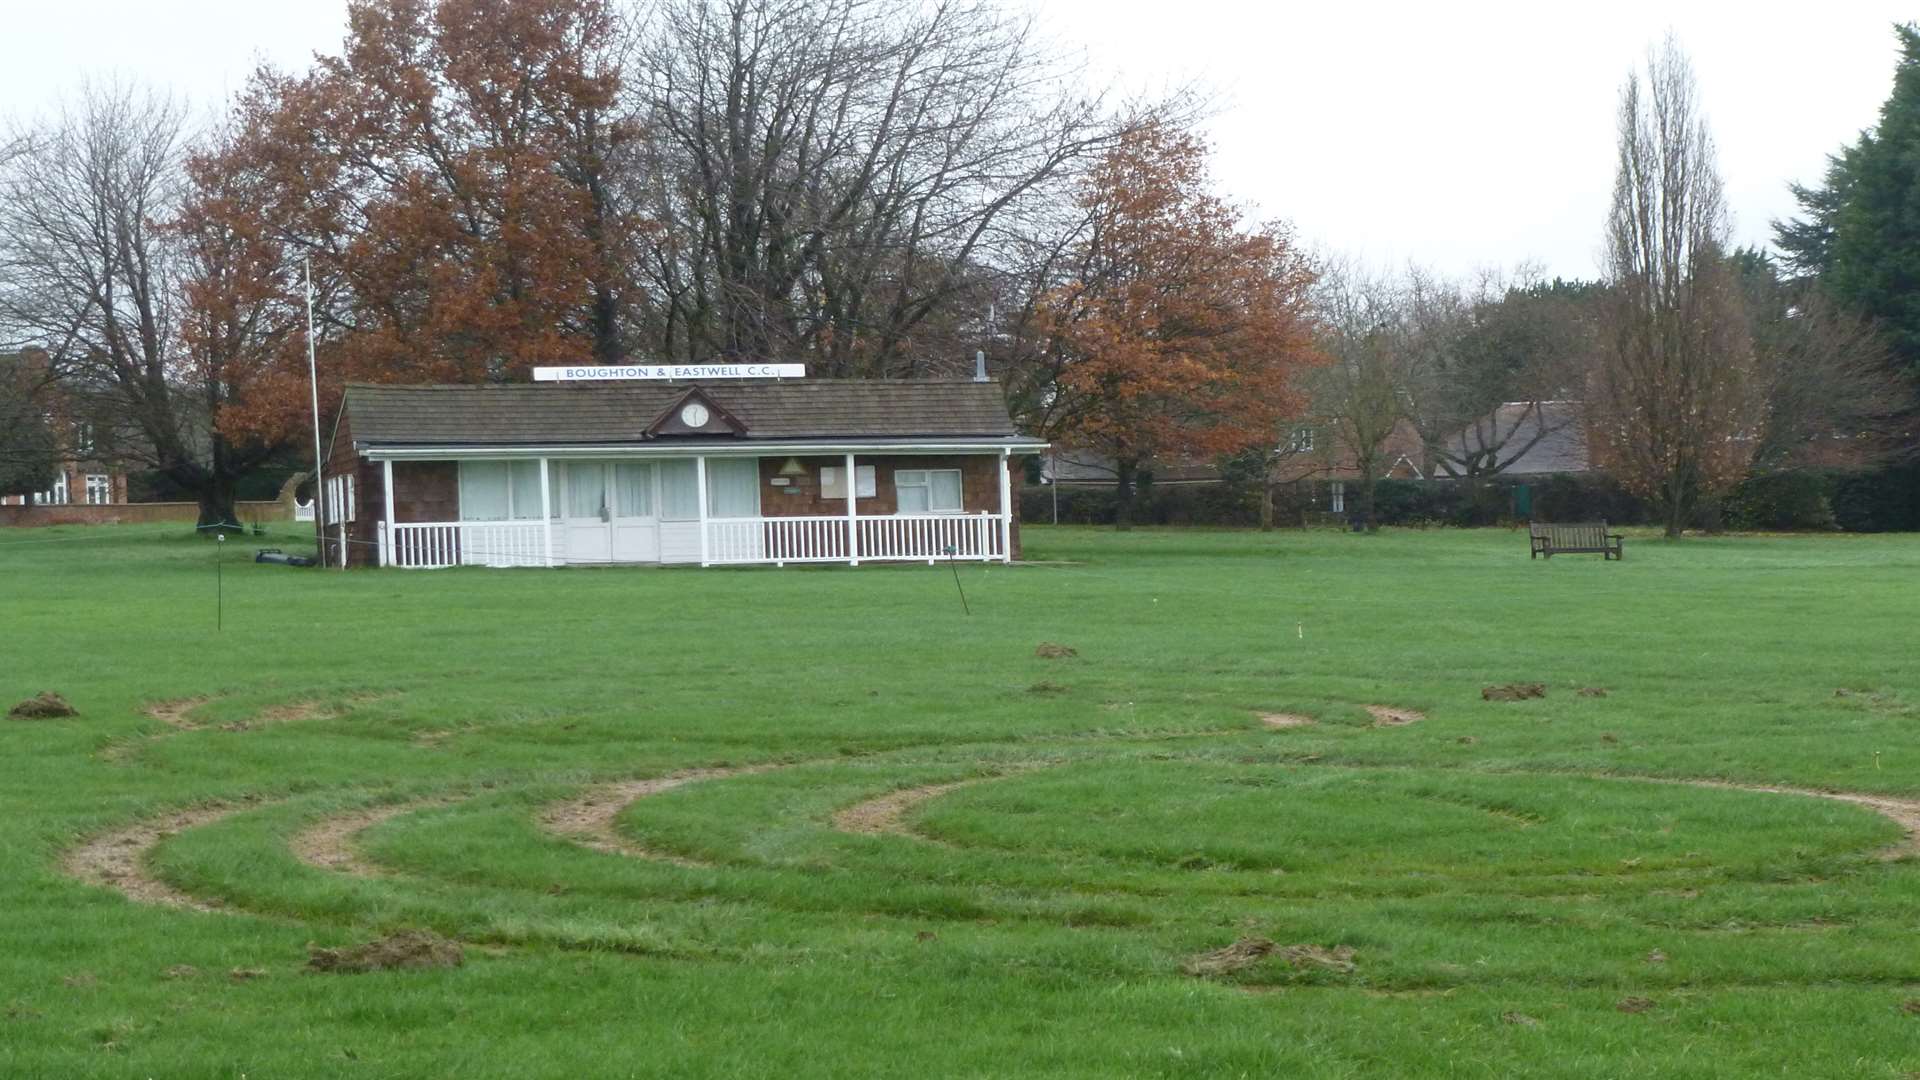 Some of the damage caused by joyriders to the square and the outfield during the winter